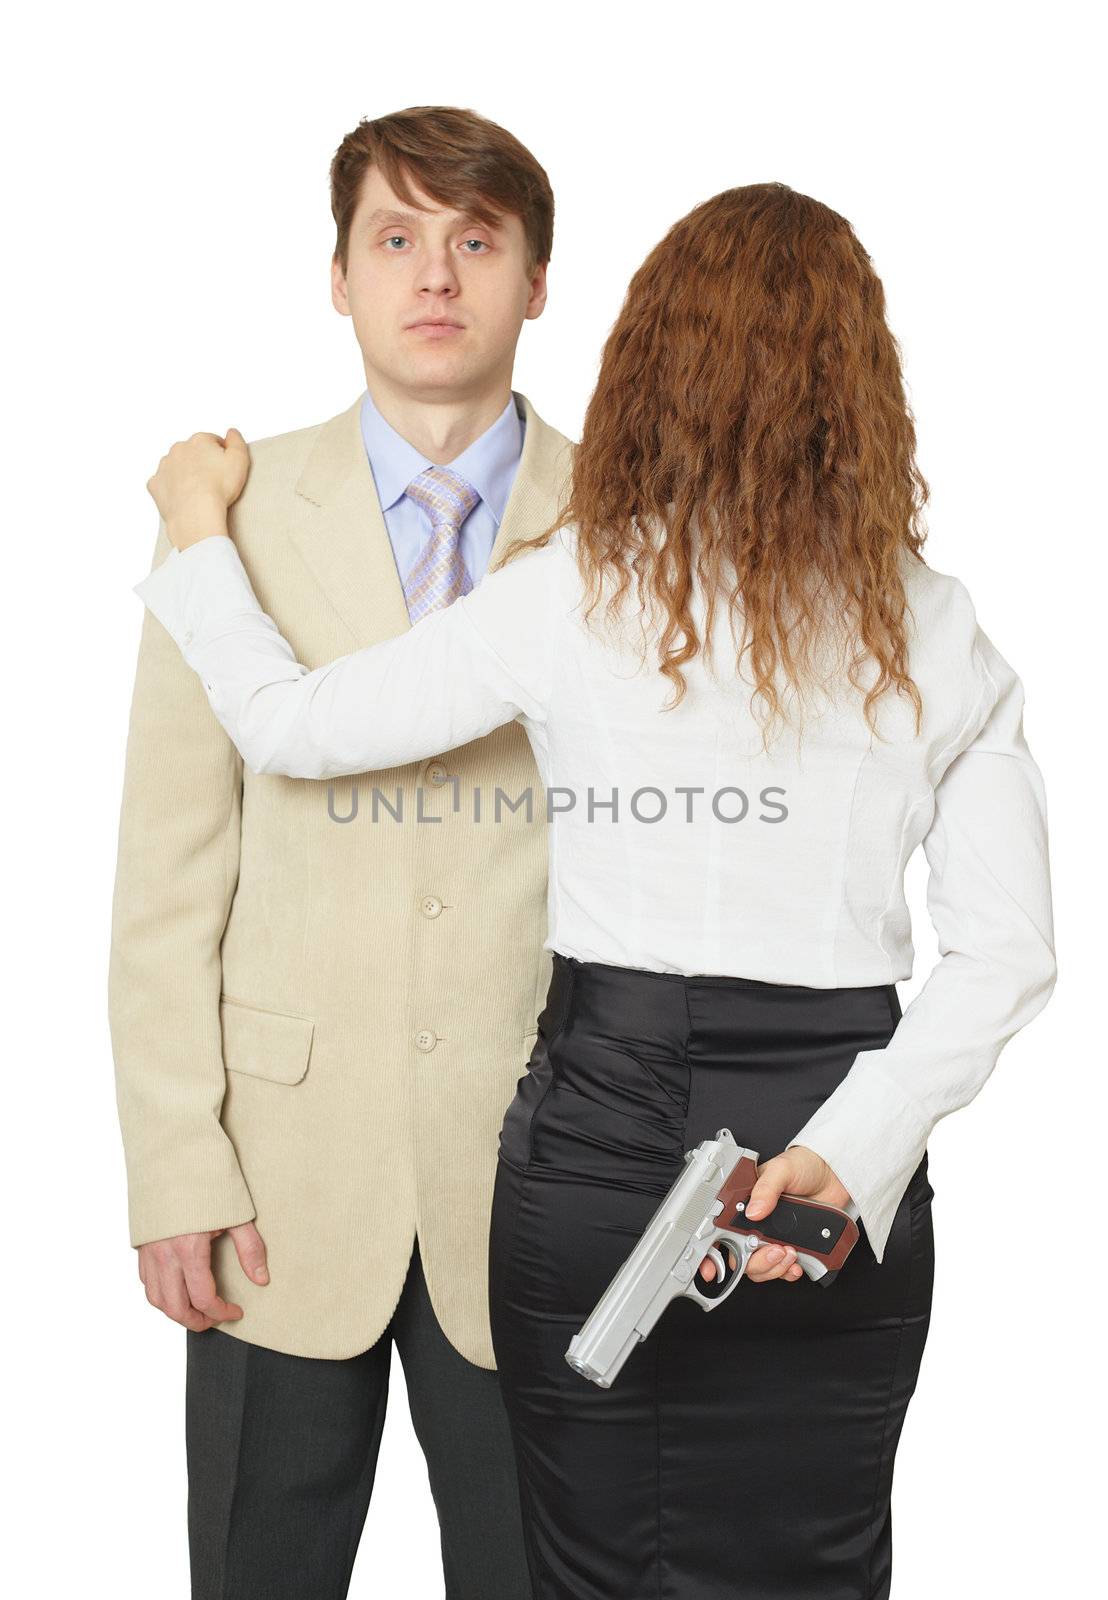 The man and the woman armed by a pistol it is isolated on a white background